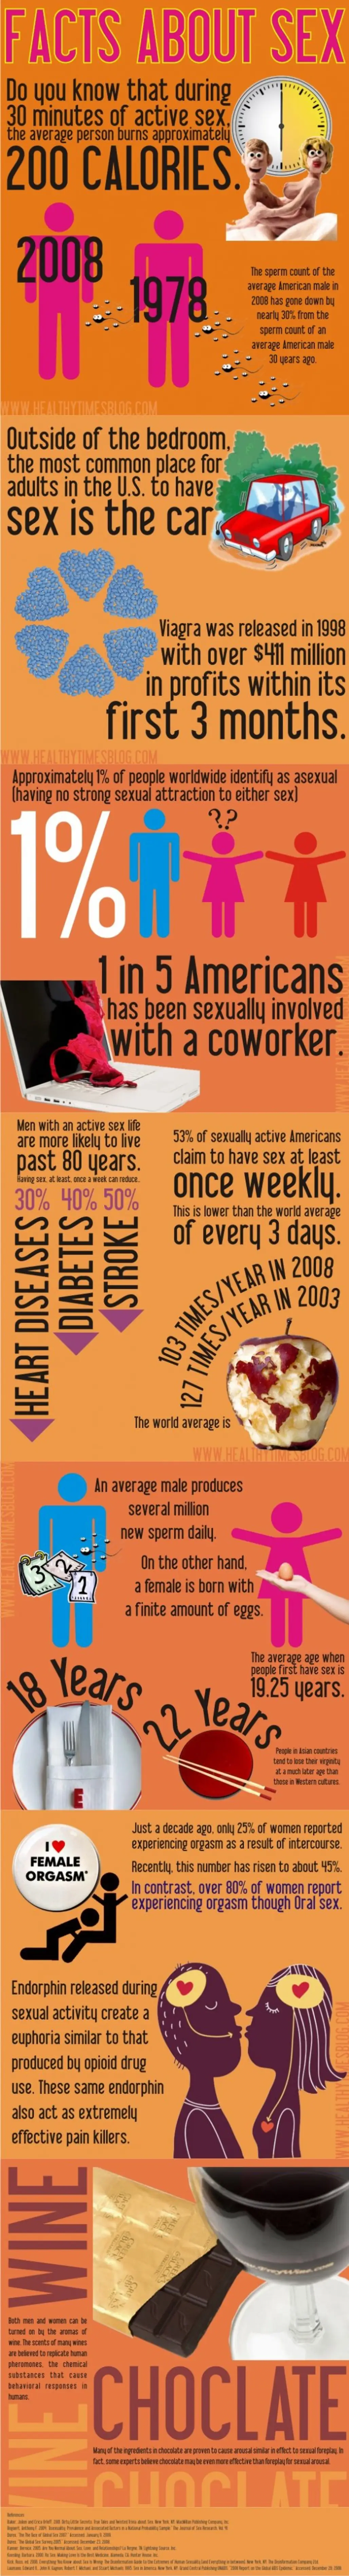 Facts about Sex